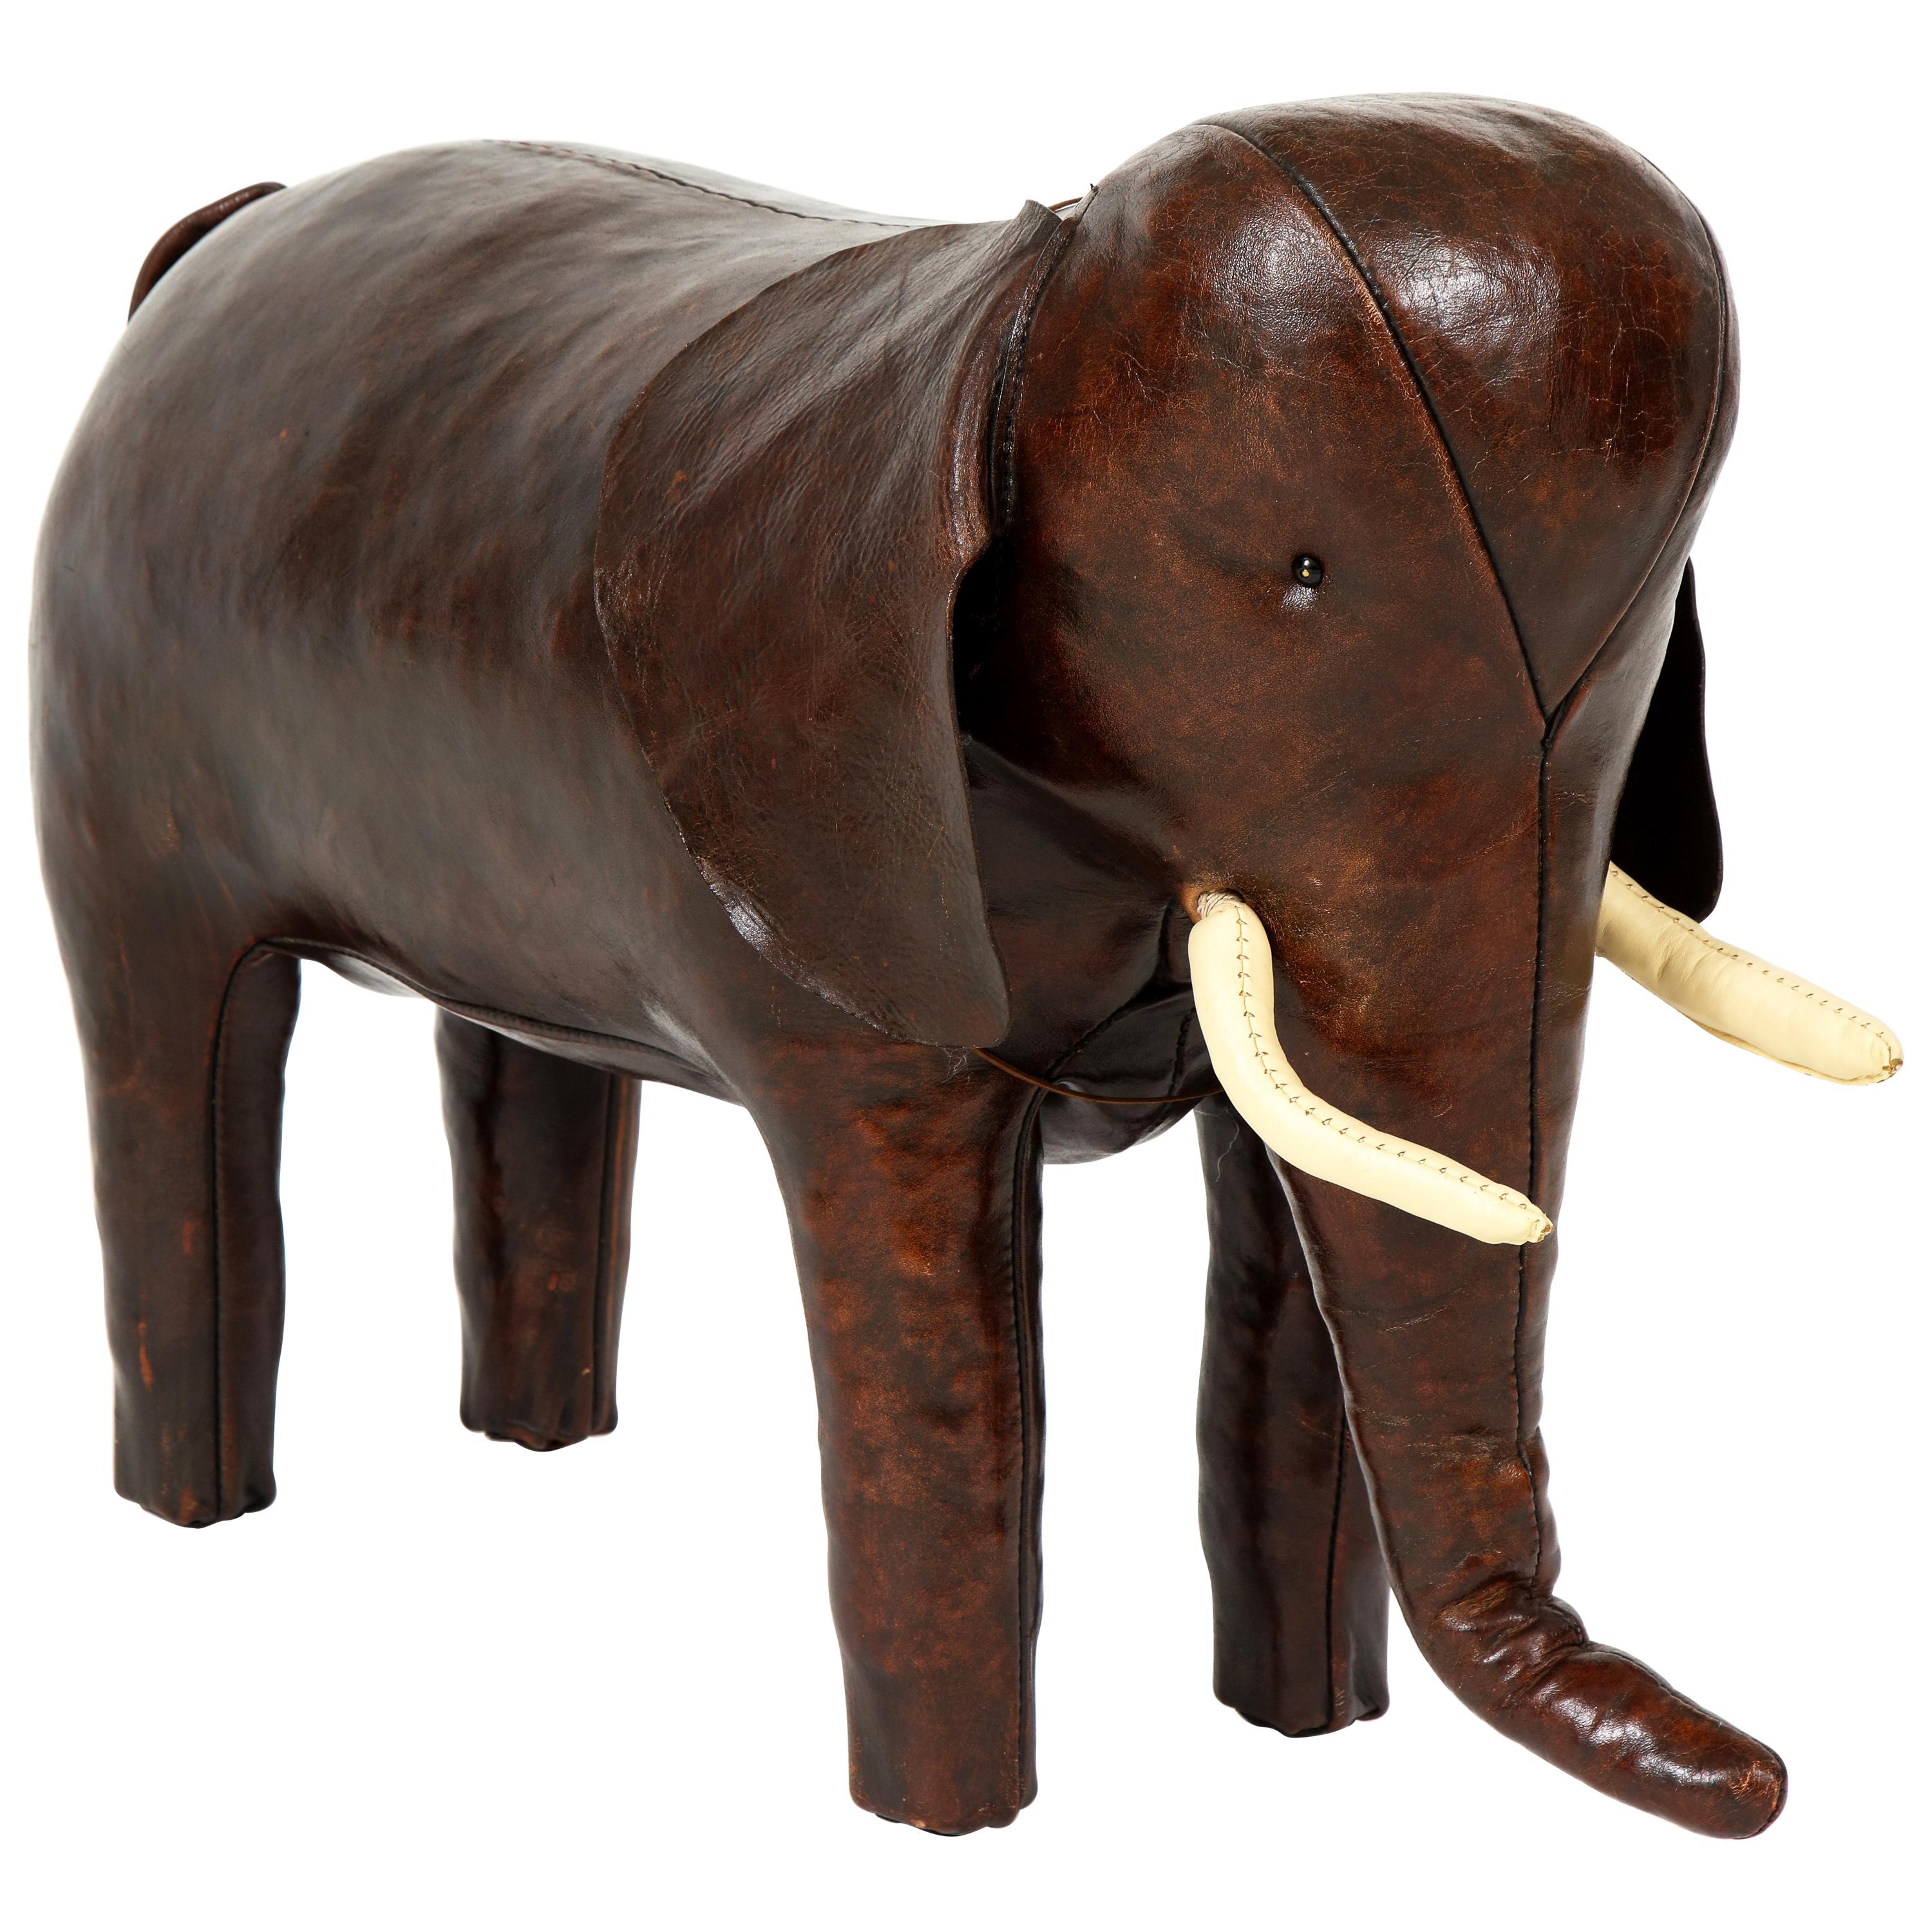 Abercrombie & Fitch Elephant Footstool by Dimitri Omersa